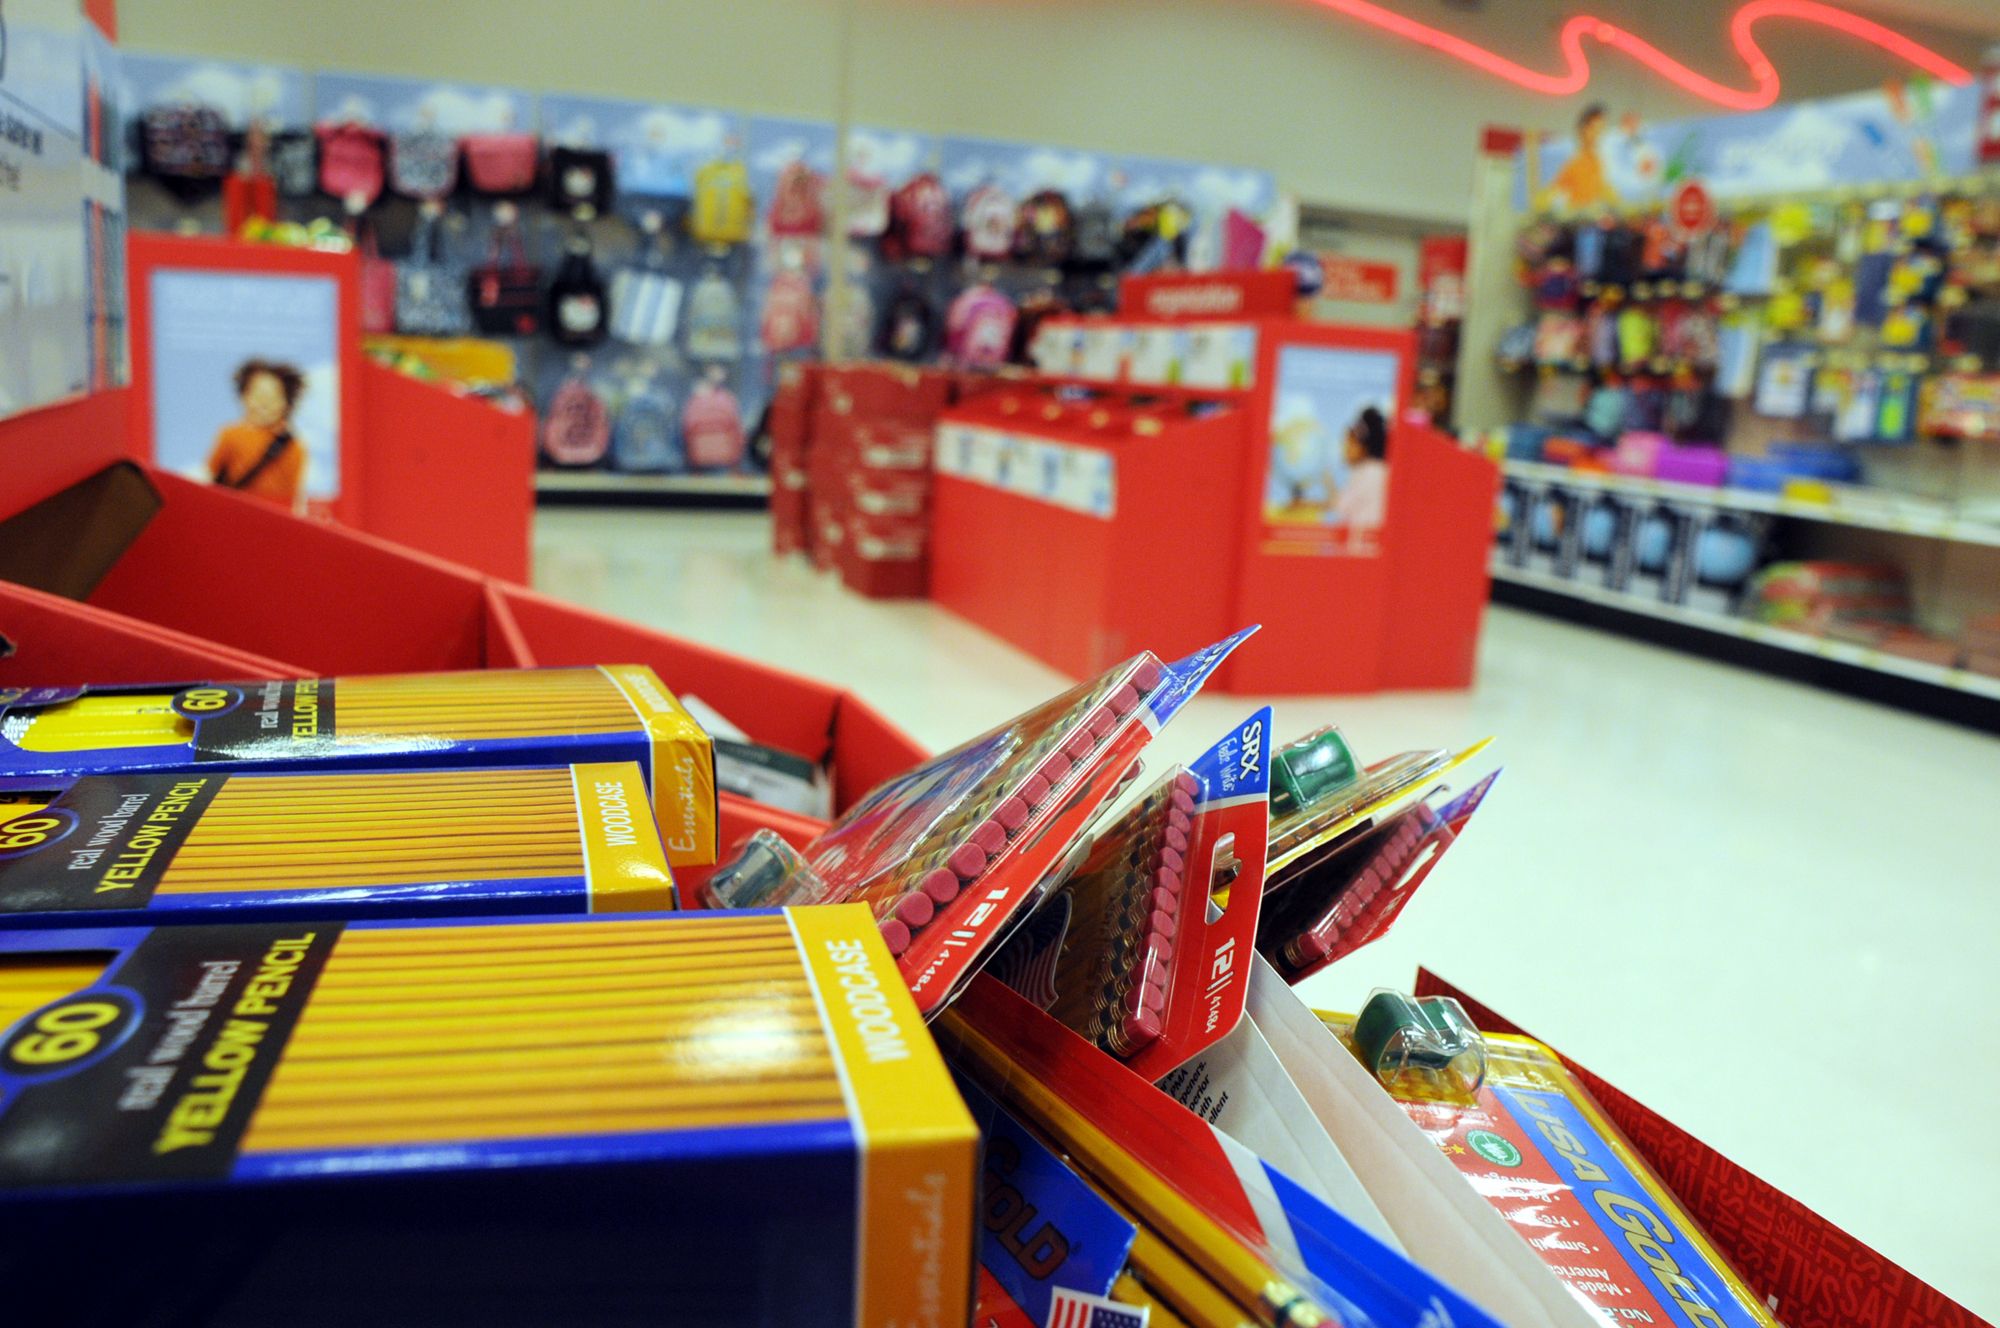 Target offering teachers 15% discount on school supplies for one